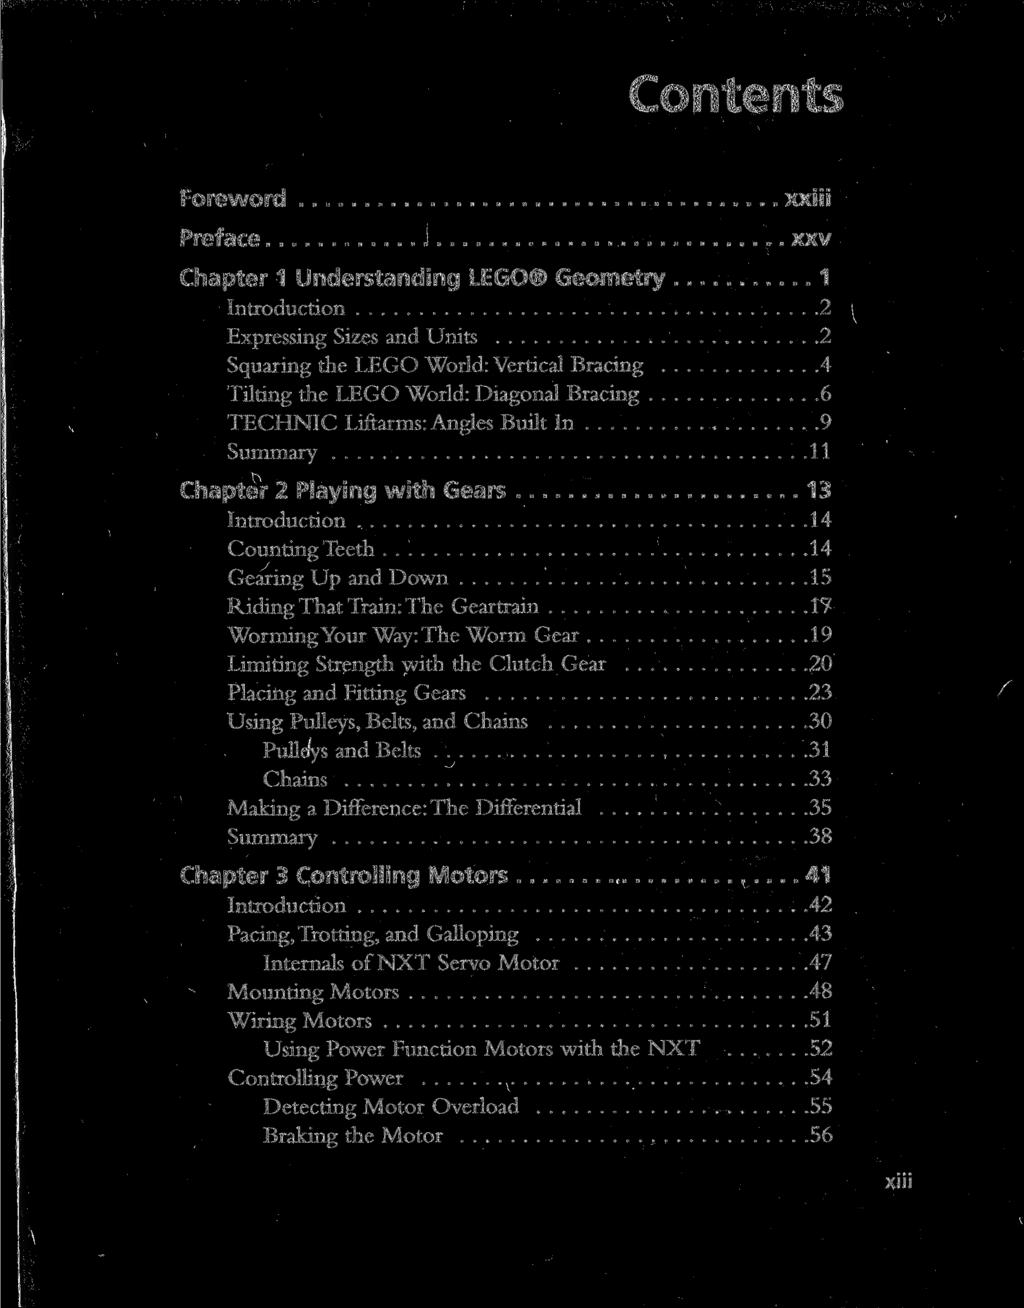 Contents Foreword Preface xxiii xxv Chapter 1 Understanding LEGO Geometry 1 Introduction 2 Expressing Sizes and Units 2 Squaring the LEGO World: Vertical Bracing 4 Tilting the LEGO World: Diagonal